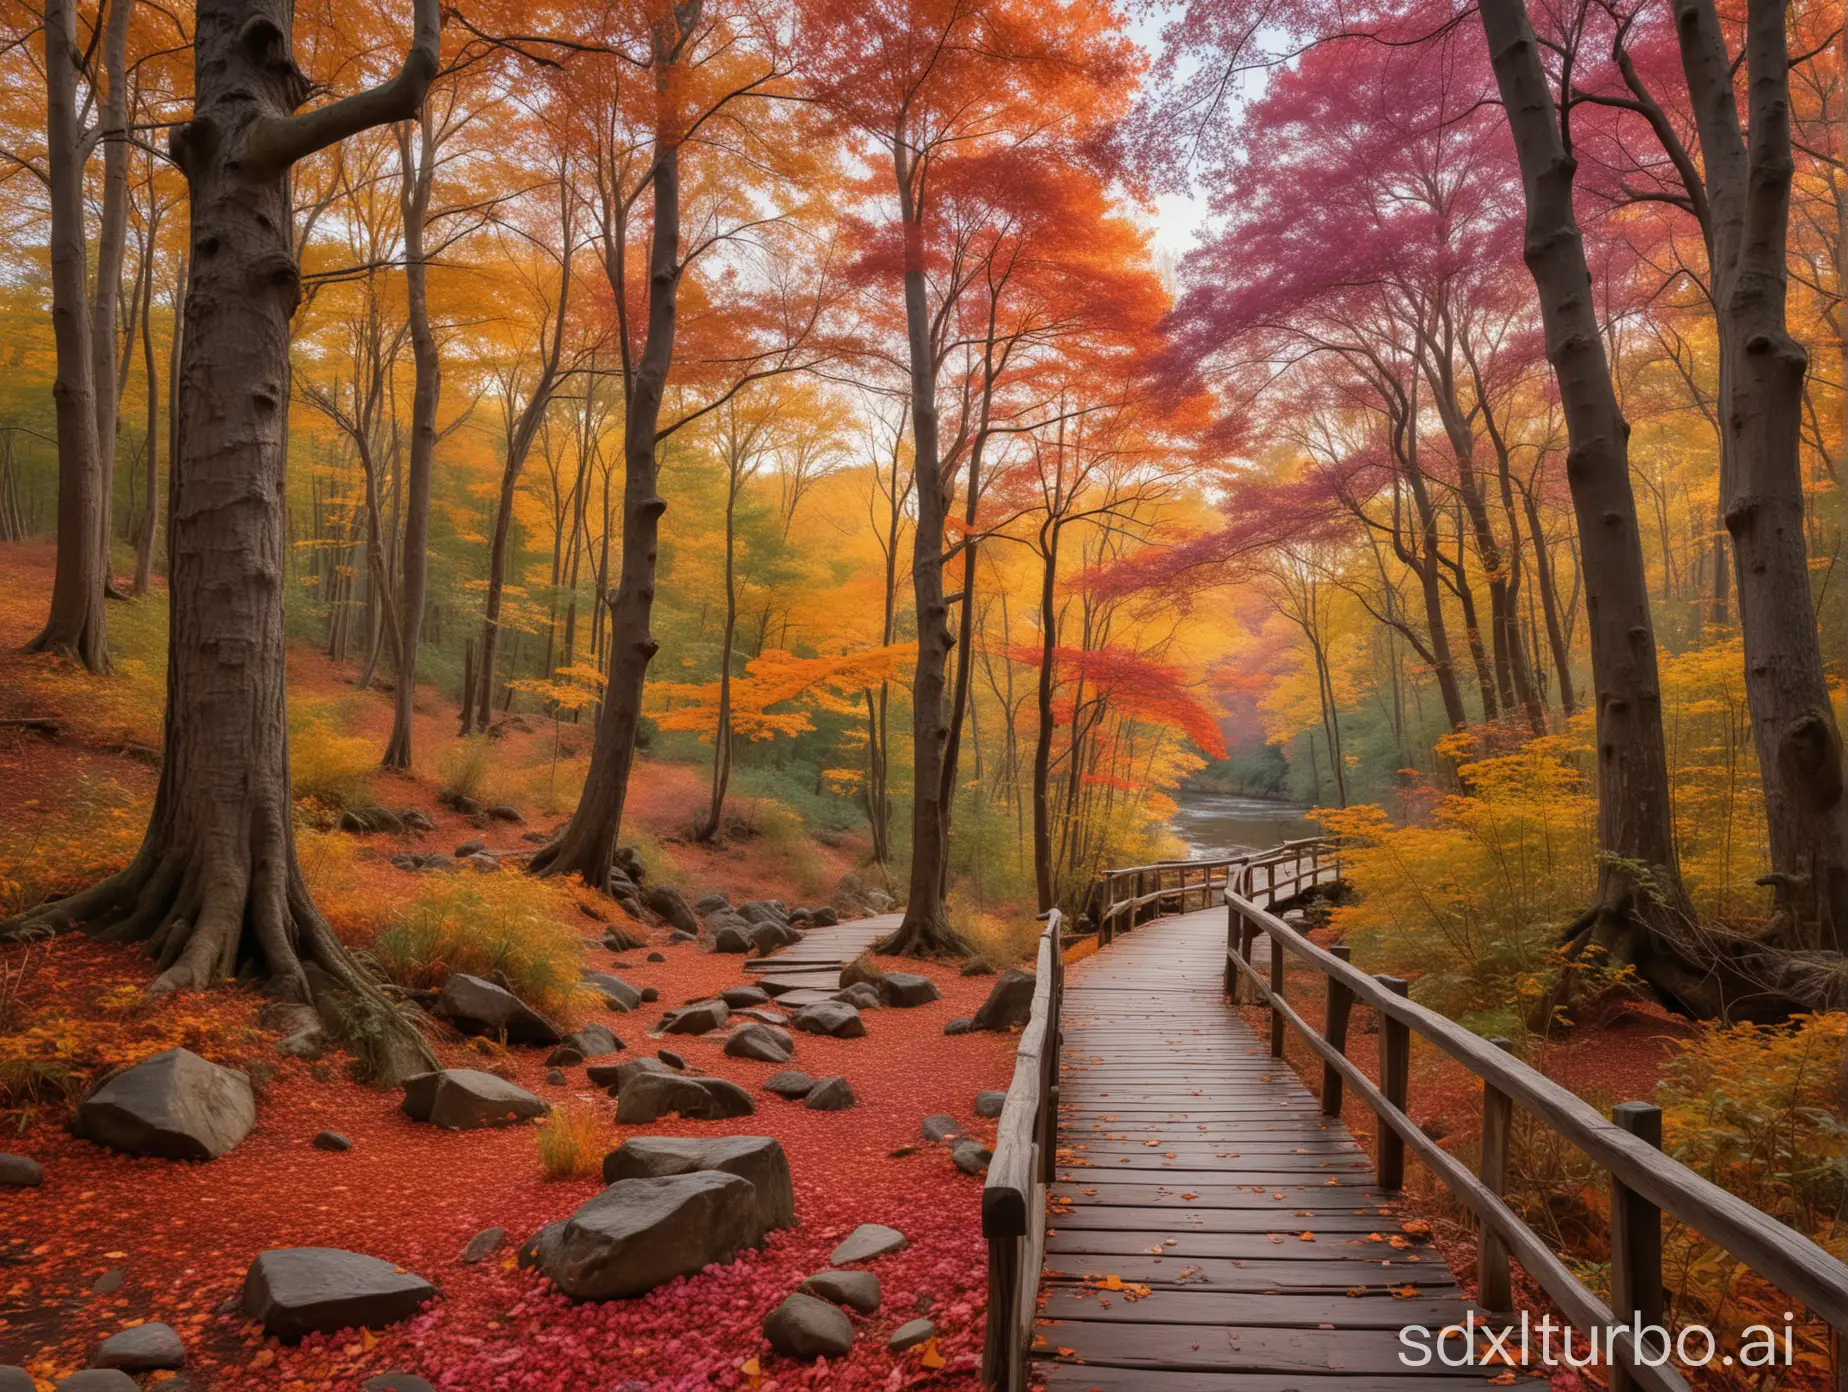 Here is a descriptive prompt for generating an image of autumn using AI text-to-image:

A serene autumn landscape with vibrant fall colors. In the foreground, a winding path meanders through a lush forest with towering oak and maple trees ablaze in shades of fiery red, vivid orange, and warm golden yellows. Their fallen leaves carpet the path in a stunning kaleidoscope of colors. The path leads toward a small wooden bridge arching over a babbling brook, its waters reflecting the colorful canopy above. In the distance, rolling hills dotted with more autumnal trees stretch out to meet a horizon painted in soft pinks and purples from the setting sun. Wispy clouds streak across the sky, casting gentle shadows over the idyllic scene. The crisp autumn air is alive with the earthy scents of decaying leaves and pine needles.